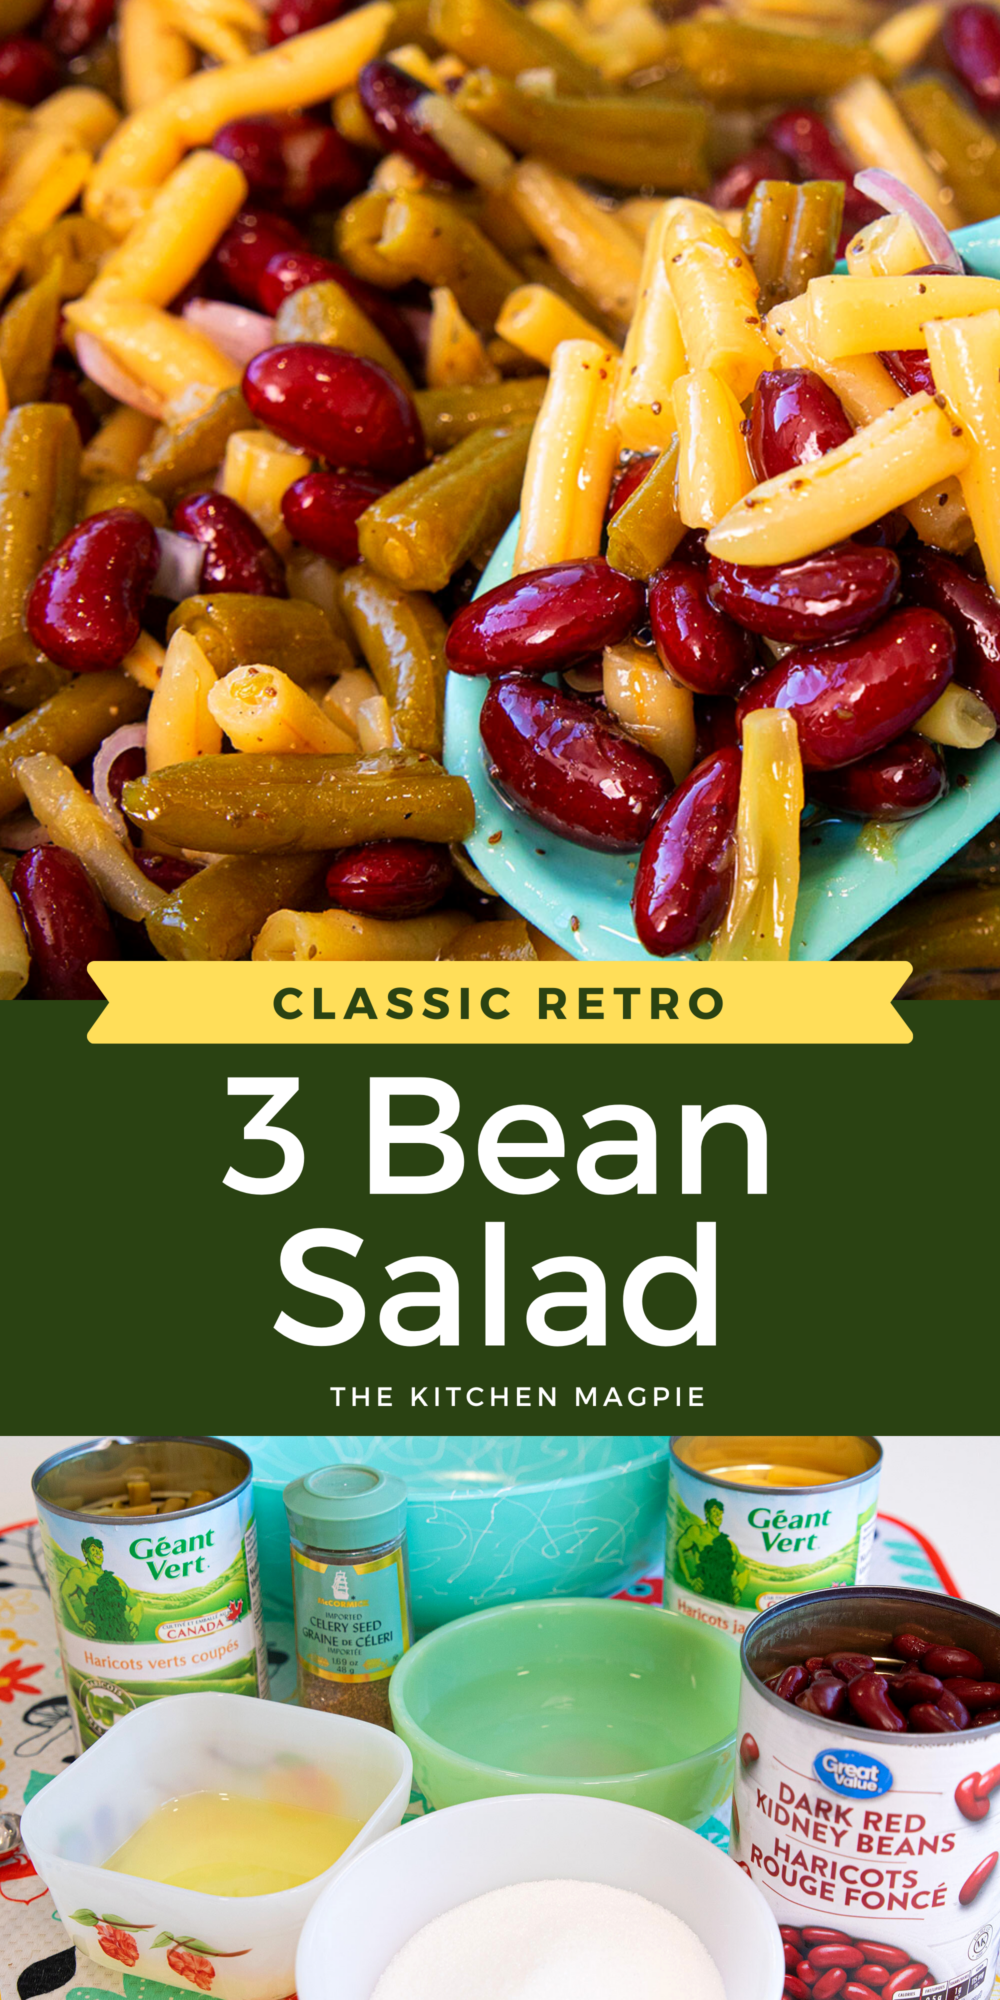 Delicious and easy three bean salad that we all grew up eating in the 60's and 70's! This is the classic recipe.